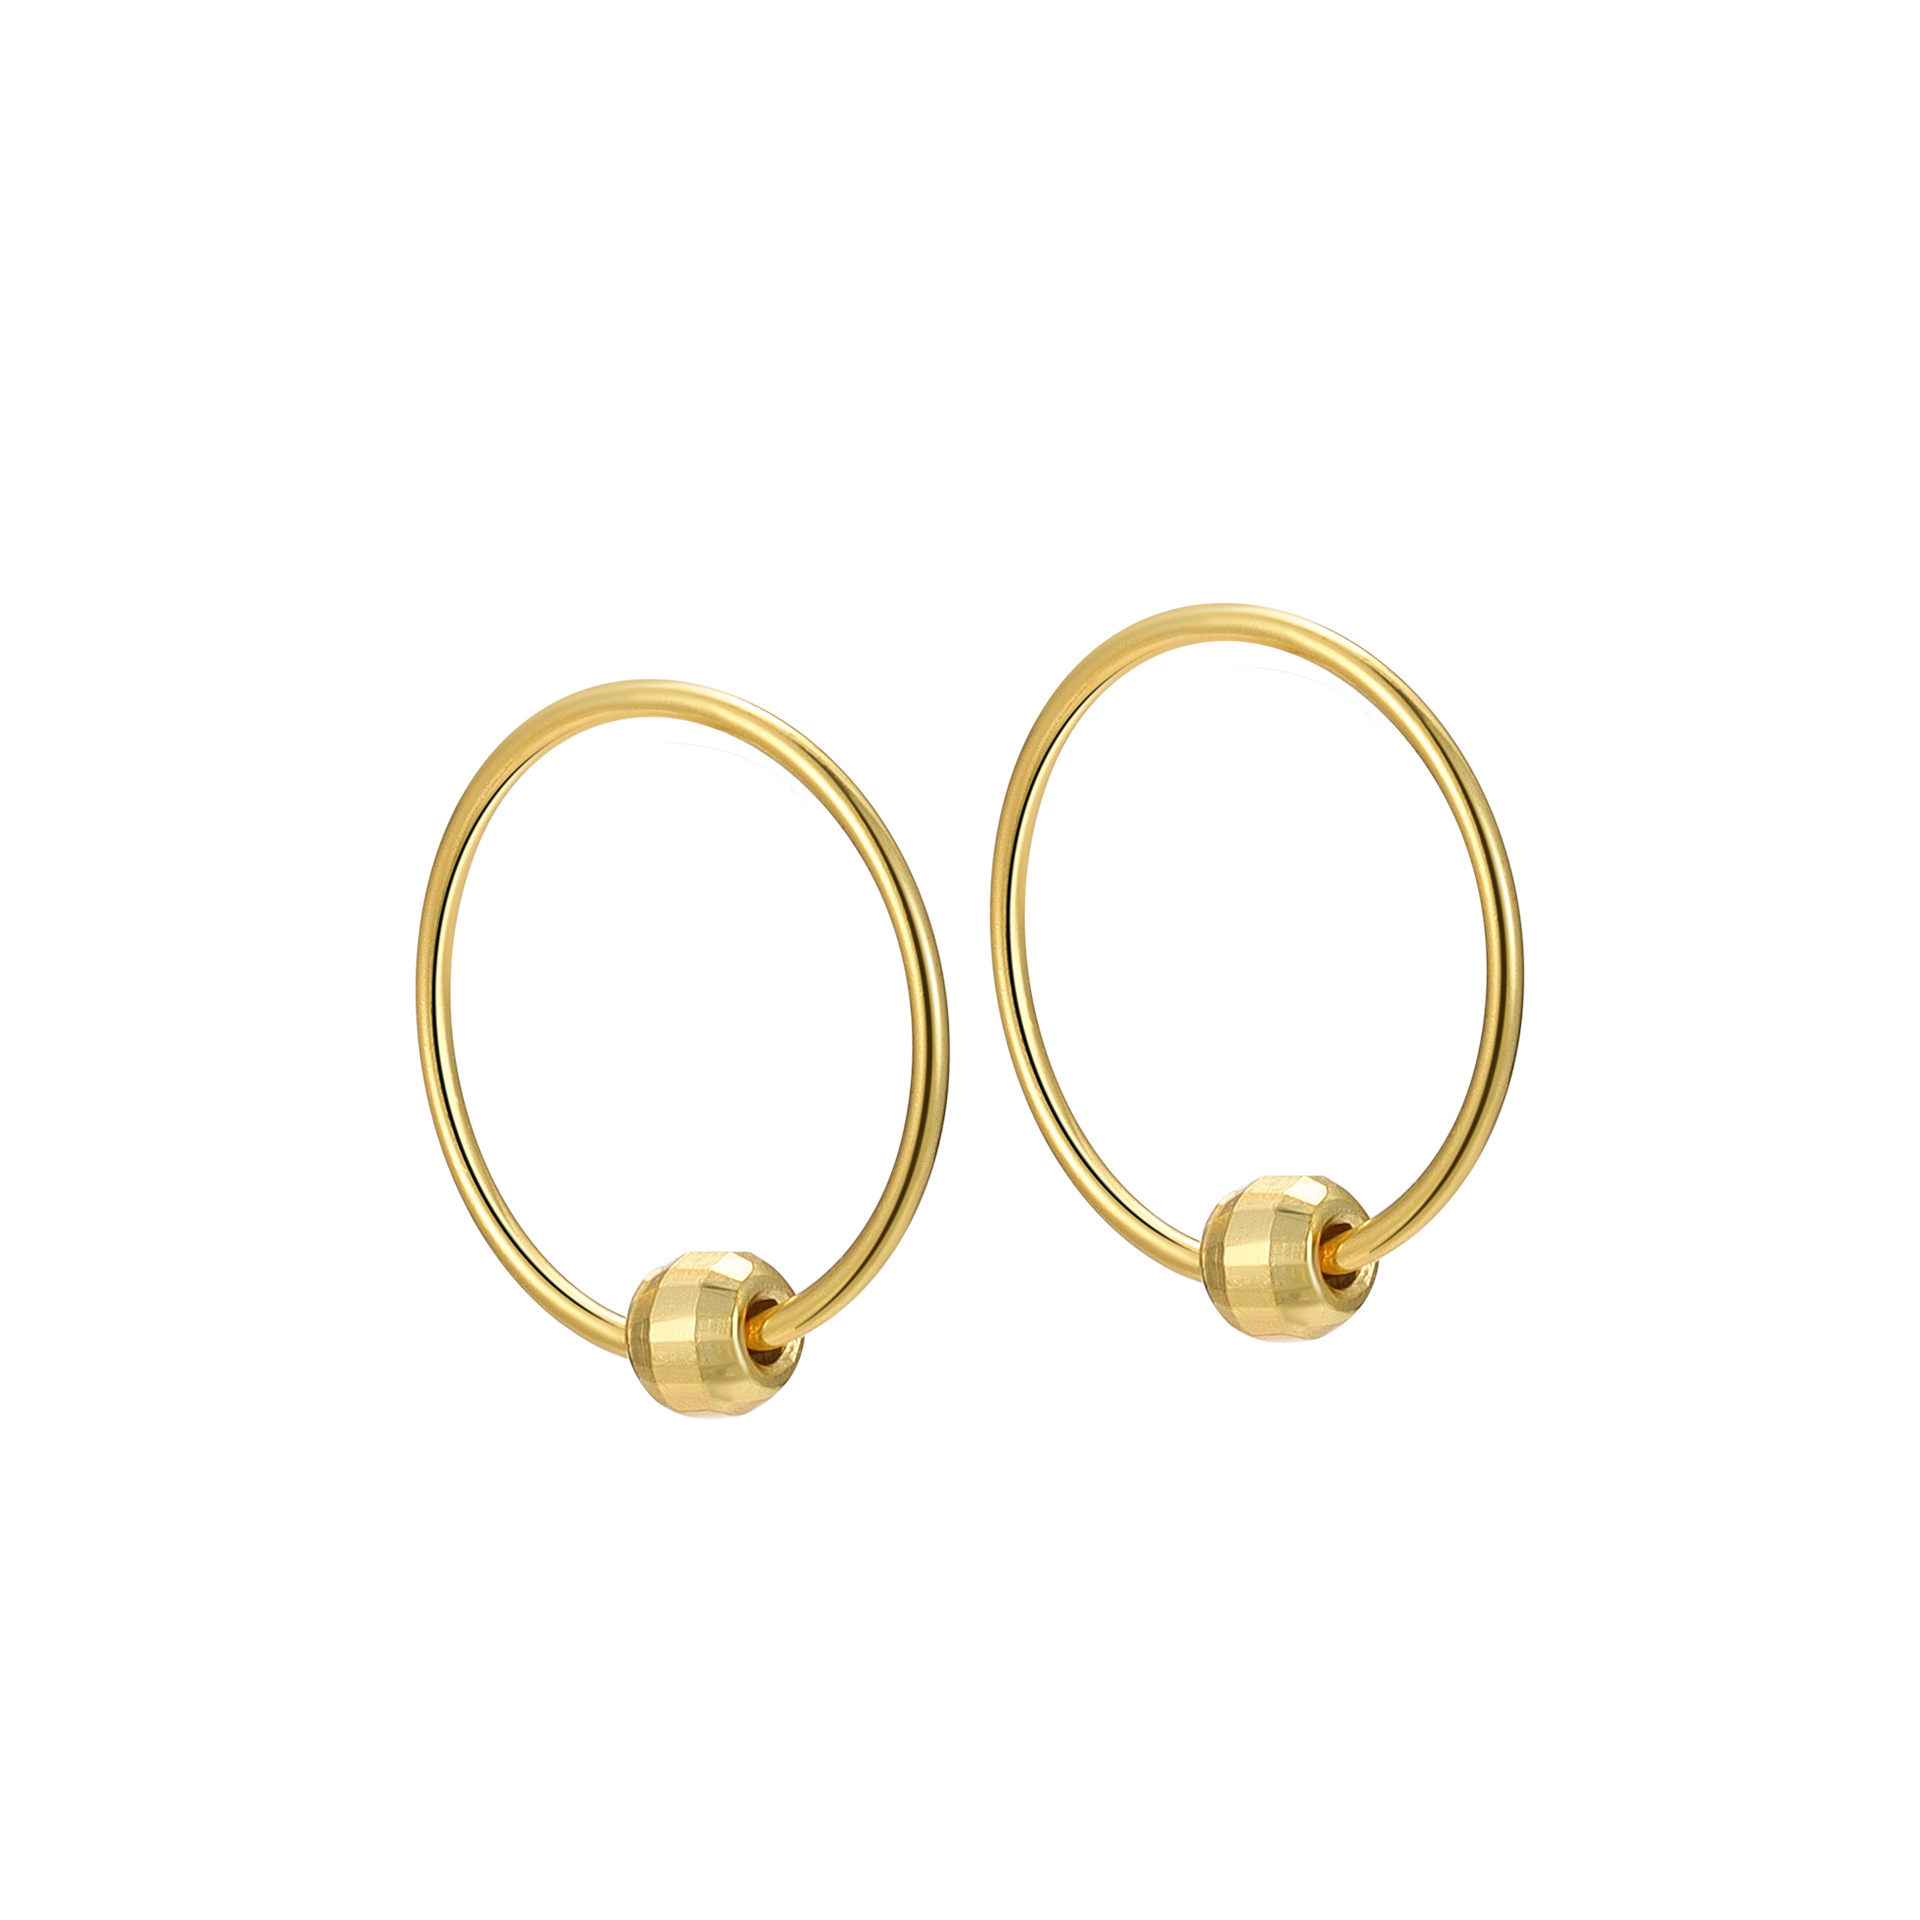 1:Yellow gold-plated